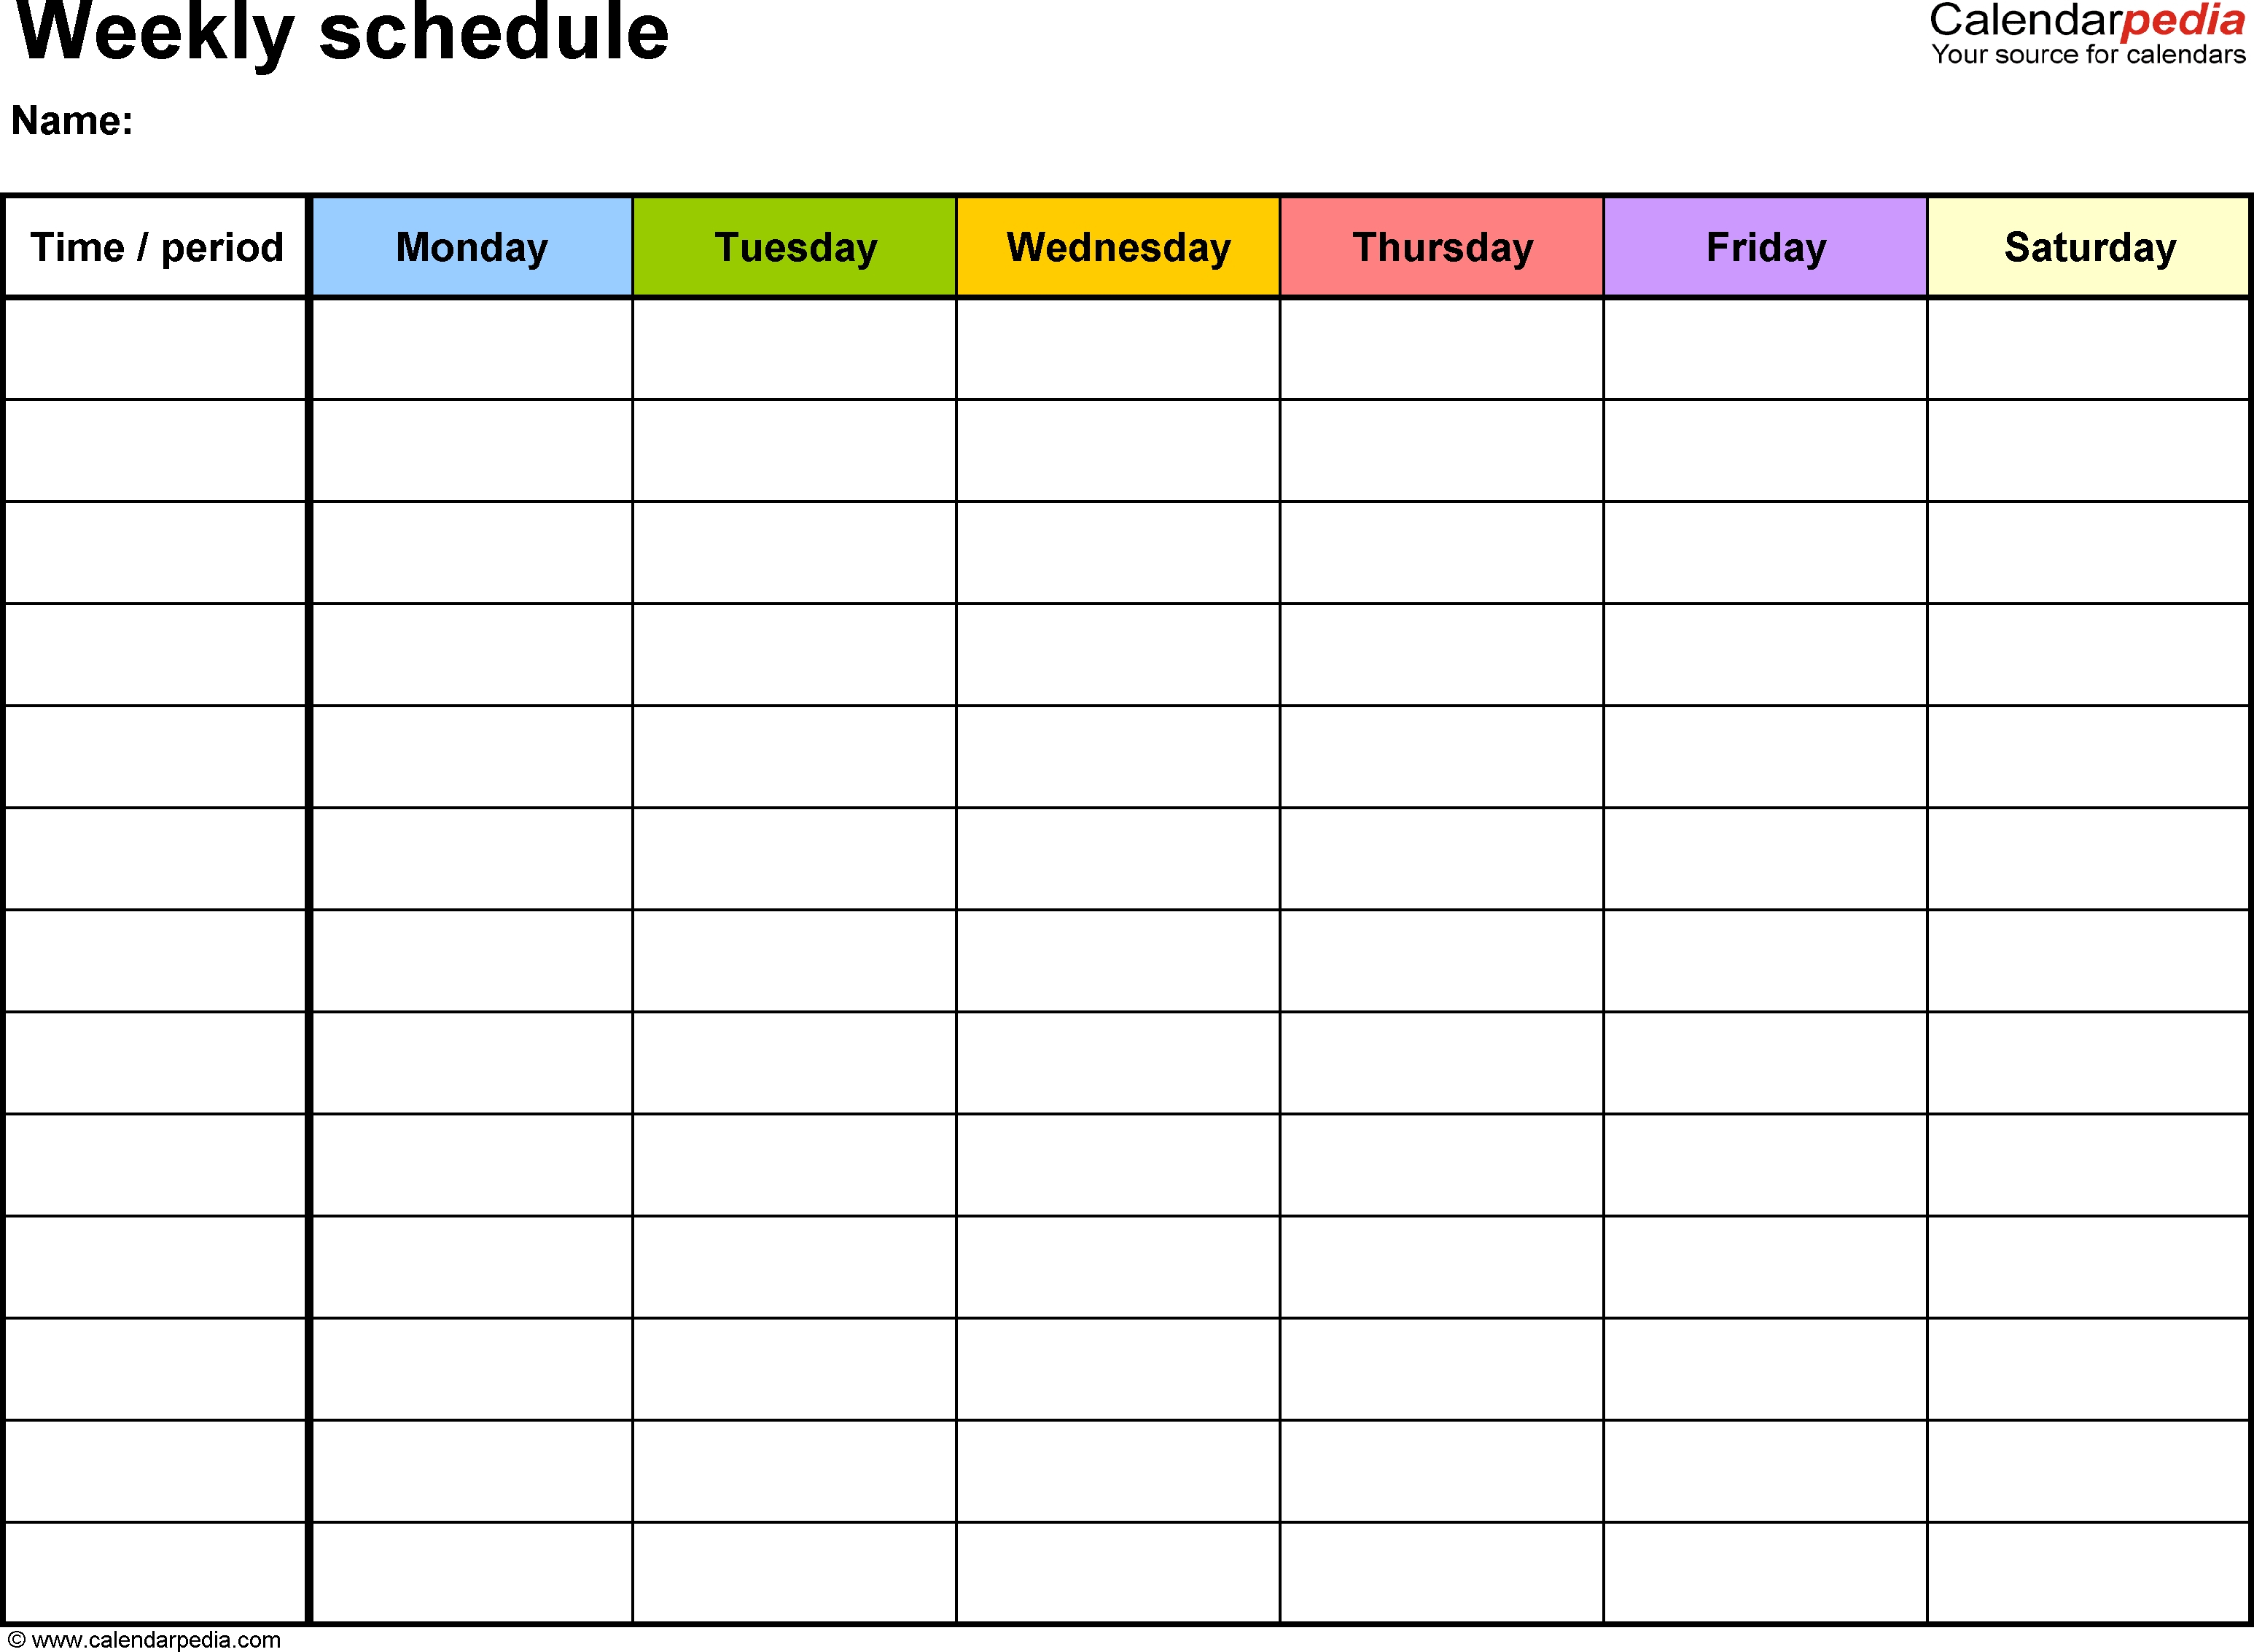 Weekly Schedule Monday Through Friday | Example Calendar intended for Calendar Monday Through Friday